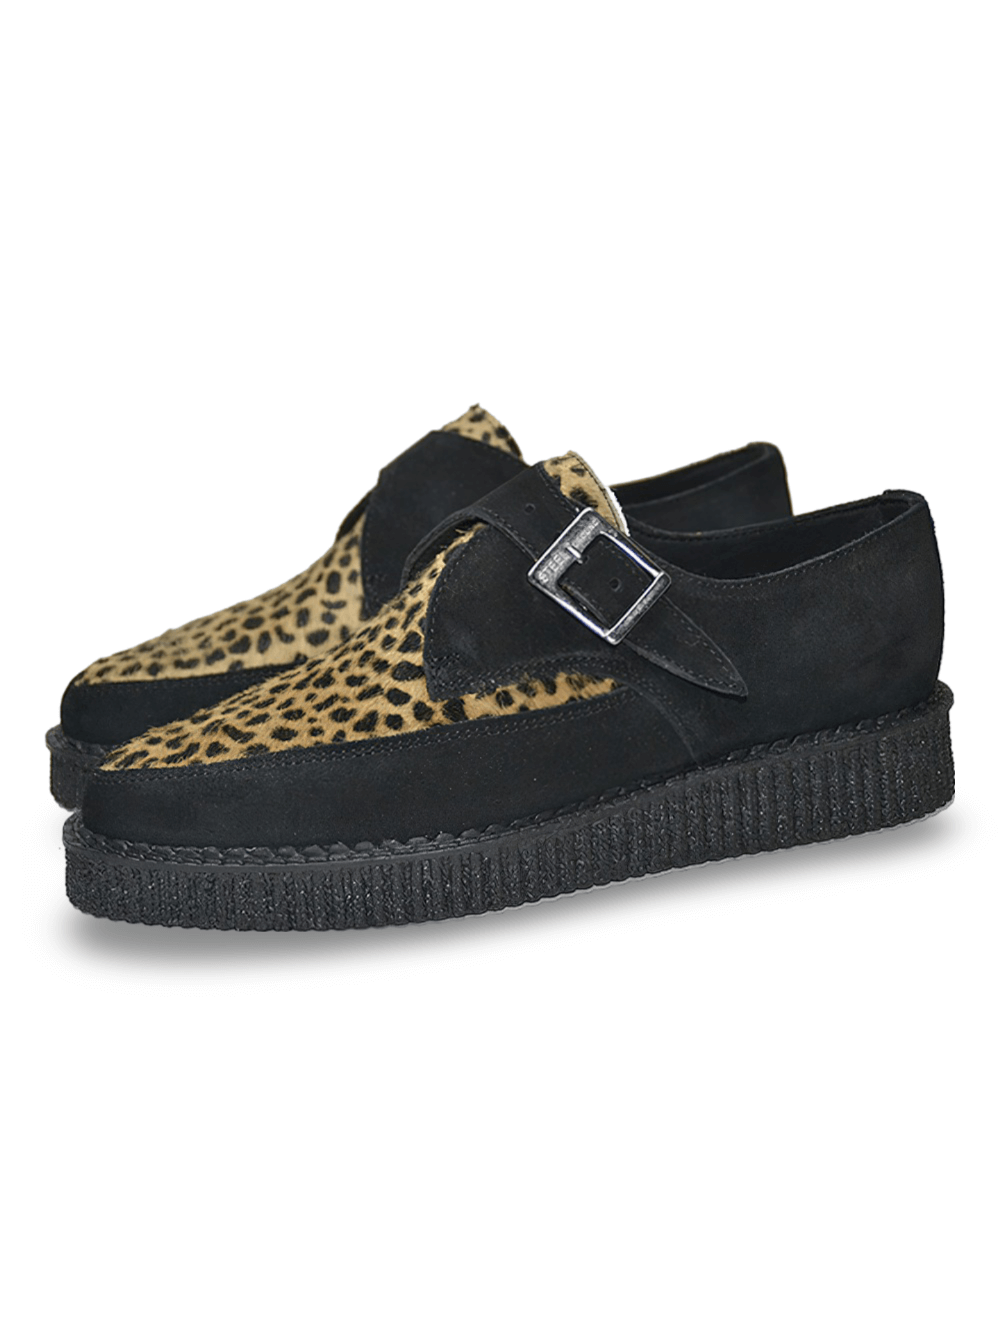 Unisex Lace-Up Black And Leopard Creeper Shoes